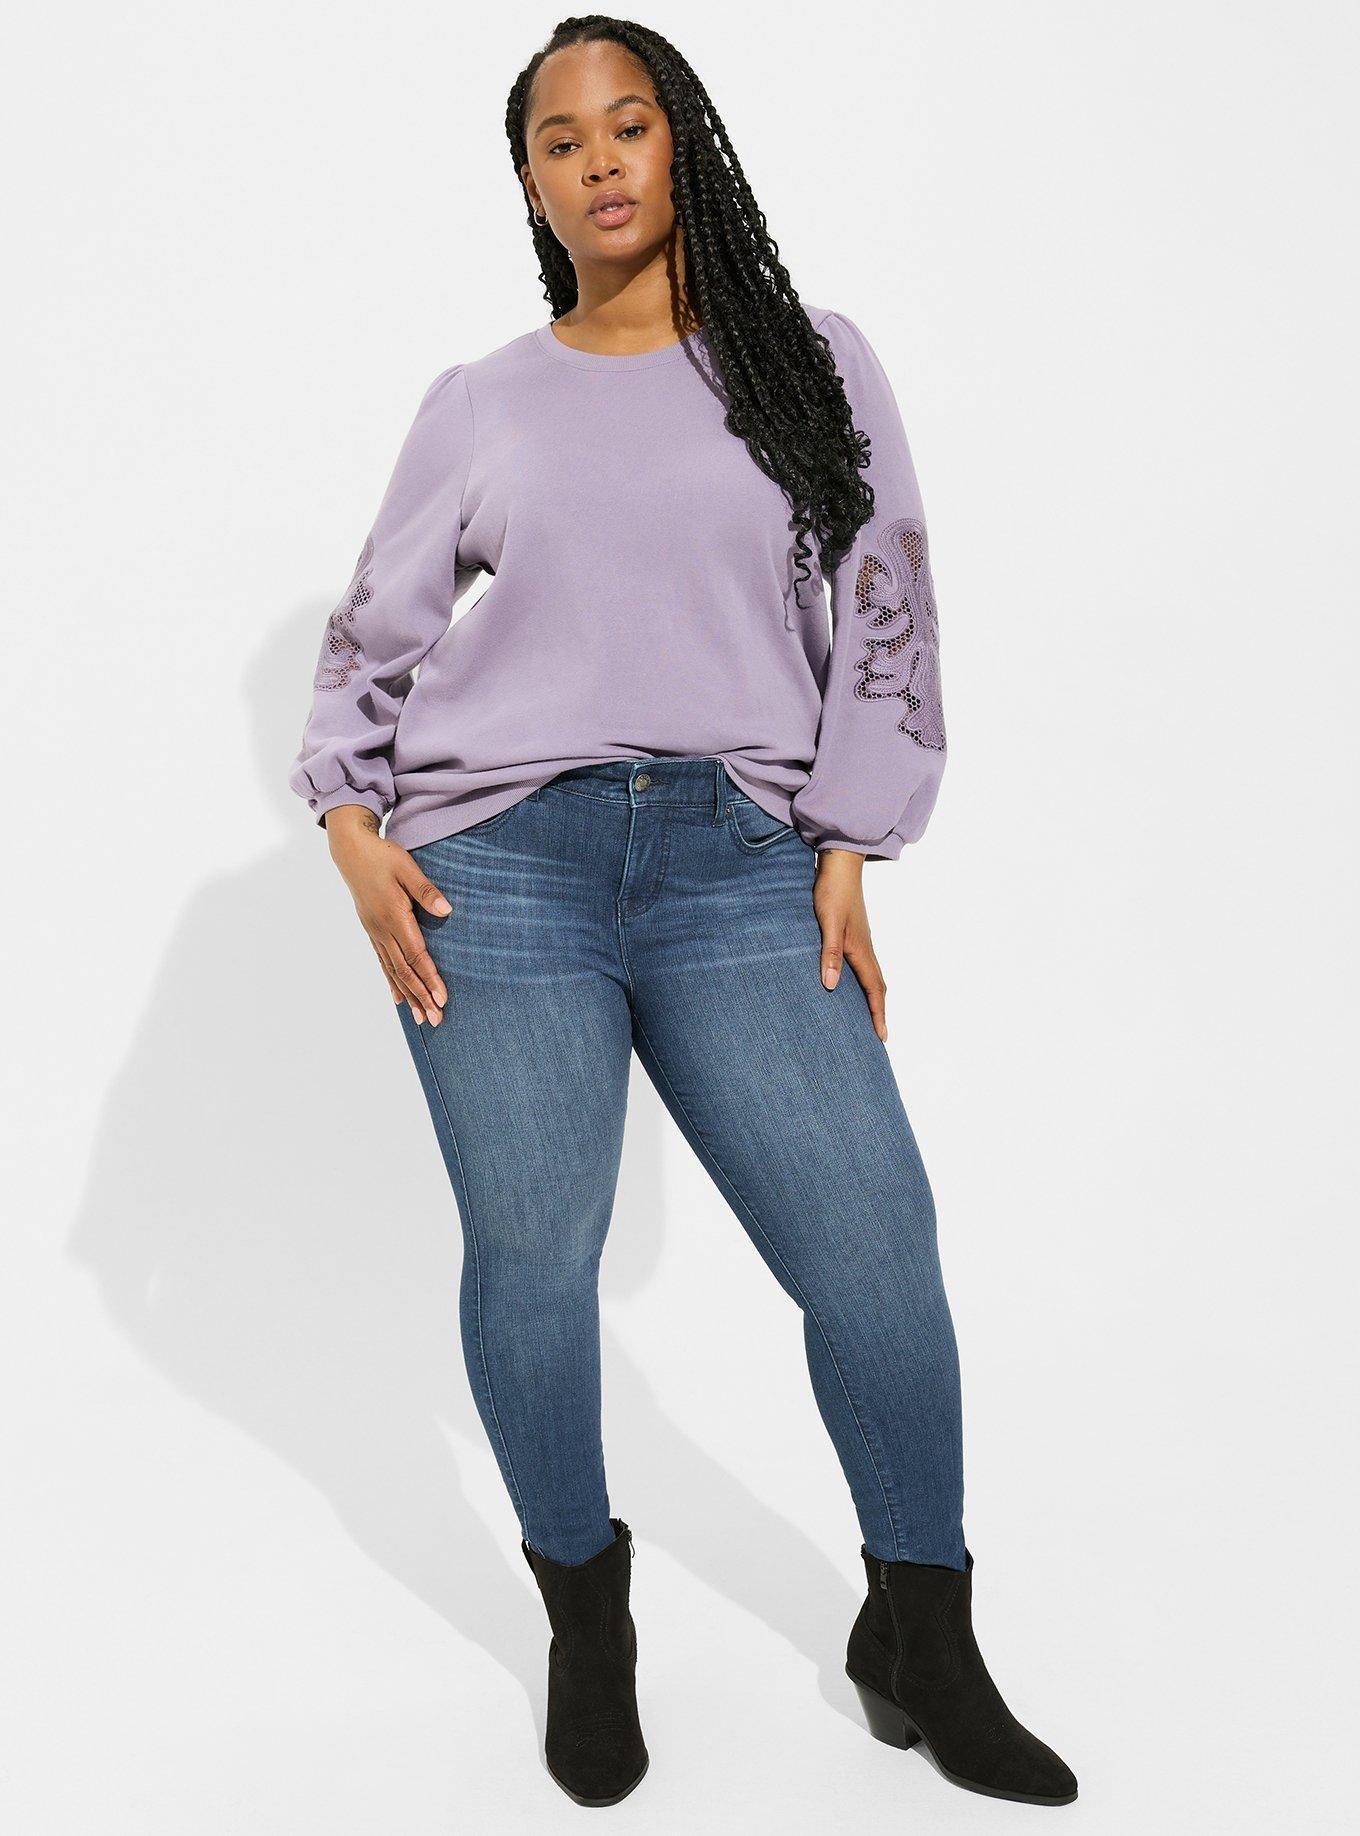 PRDECE Plus Size Pullovers Womans Jersey Casual Cozy Dominican